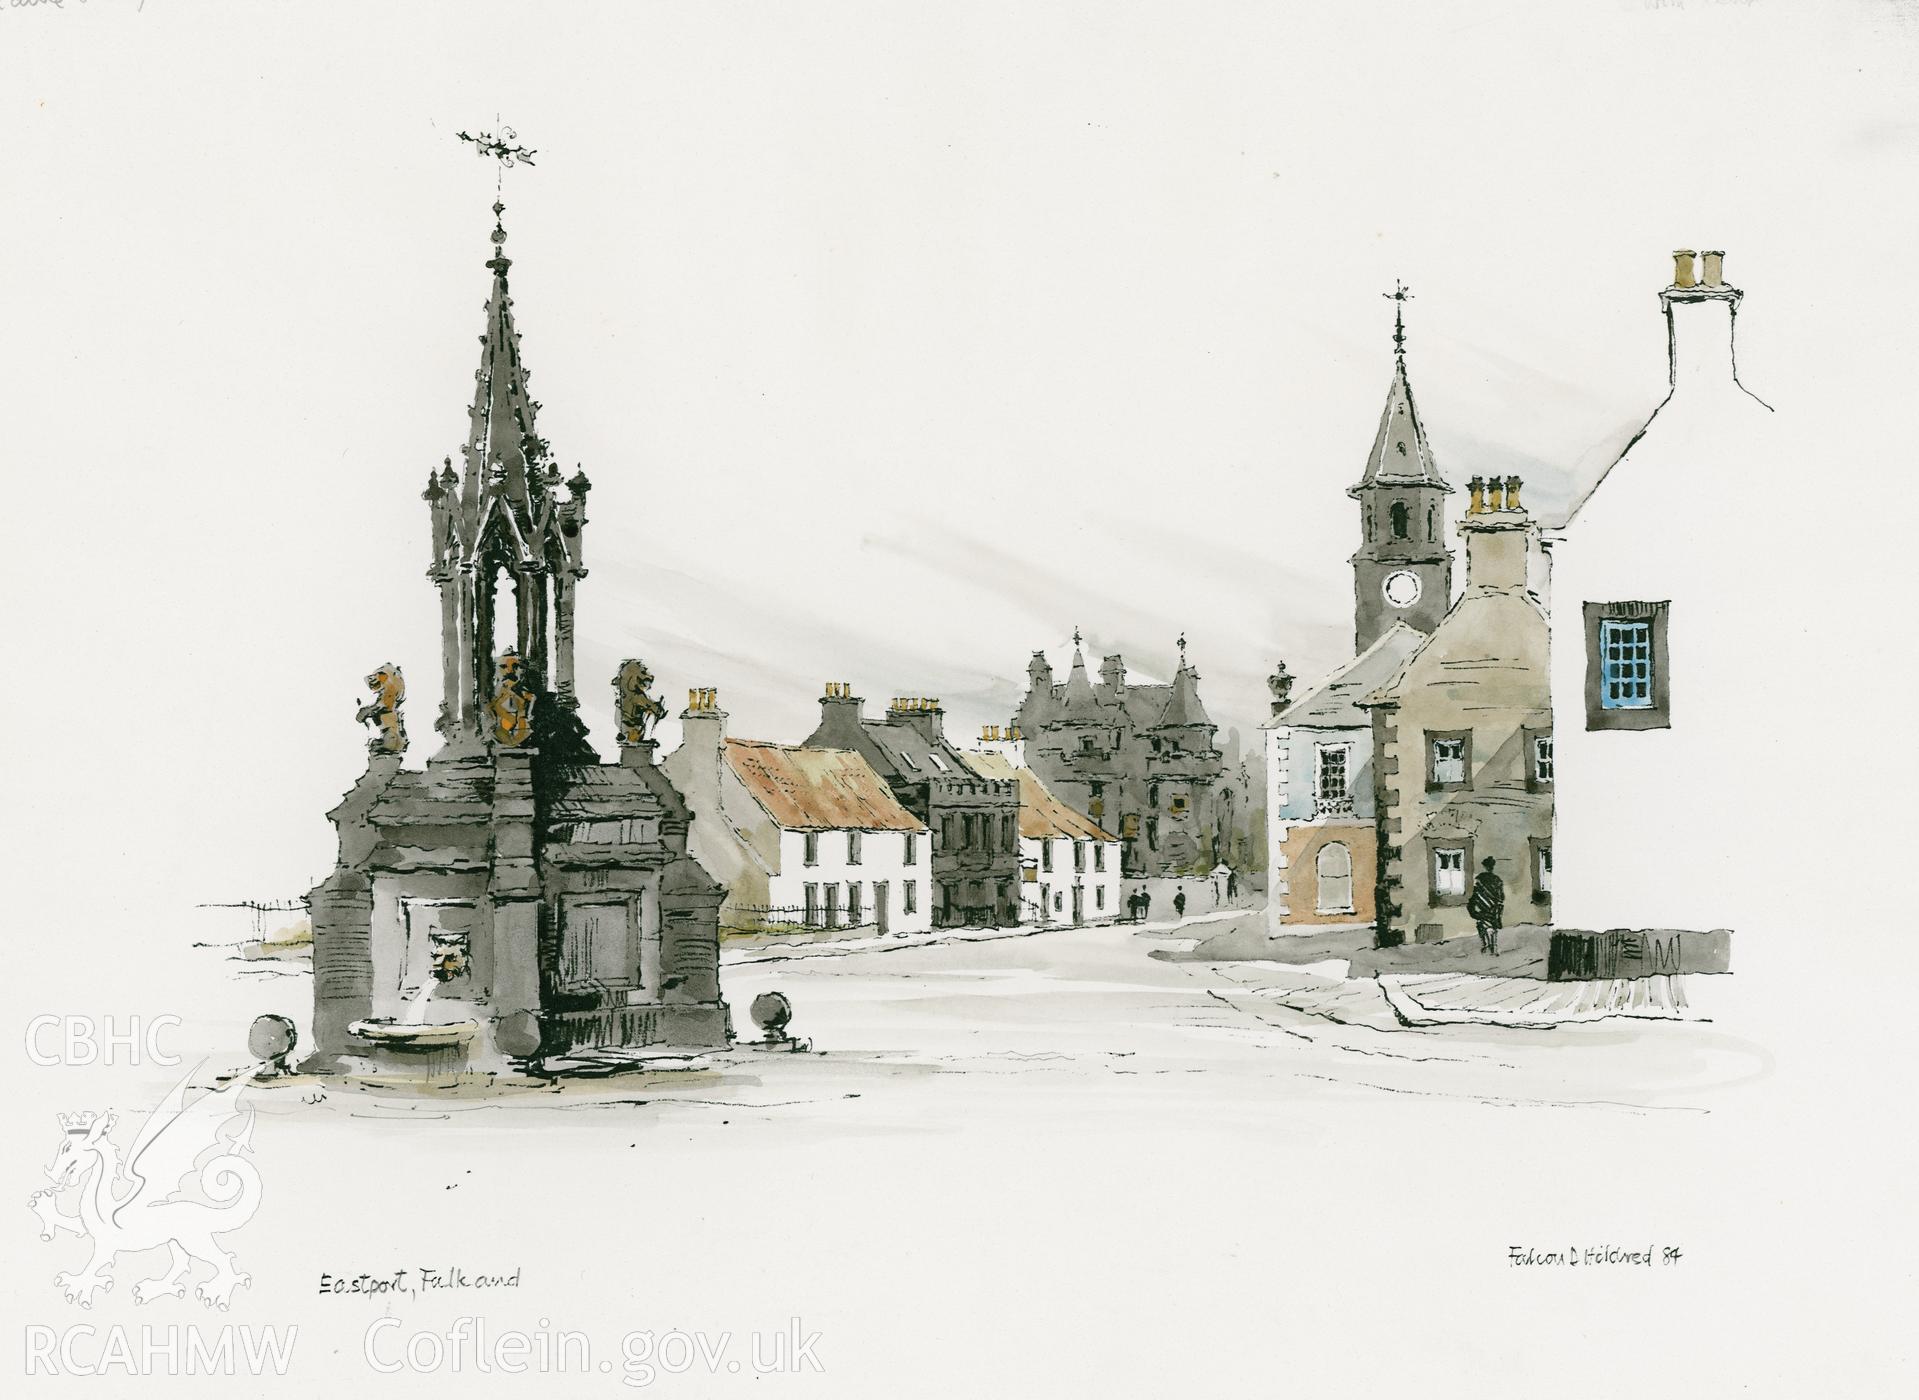 Eastport, Falkland, Scotland: (pencil and watercolour) site study and line copy drawing.